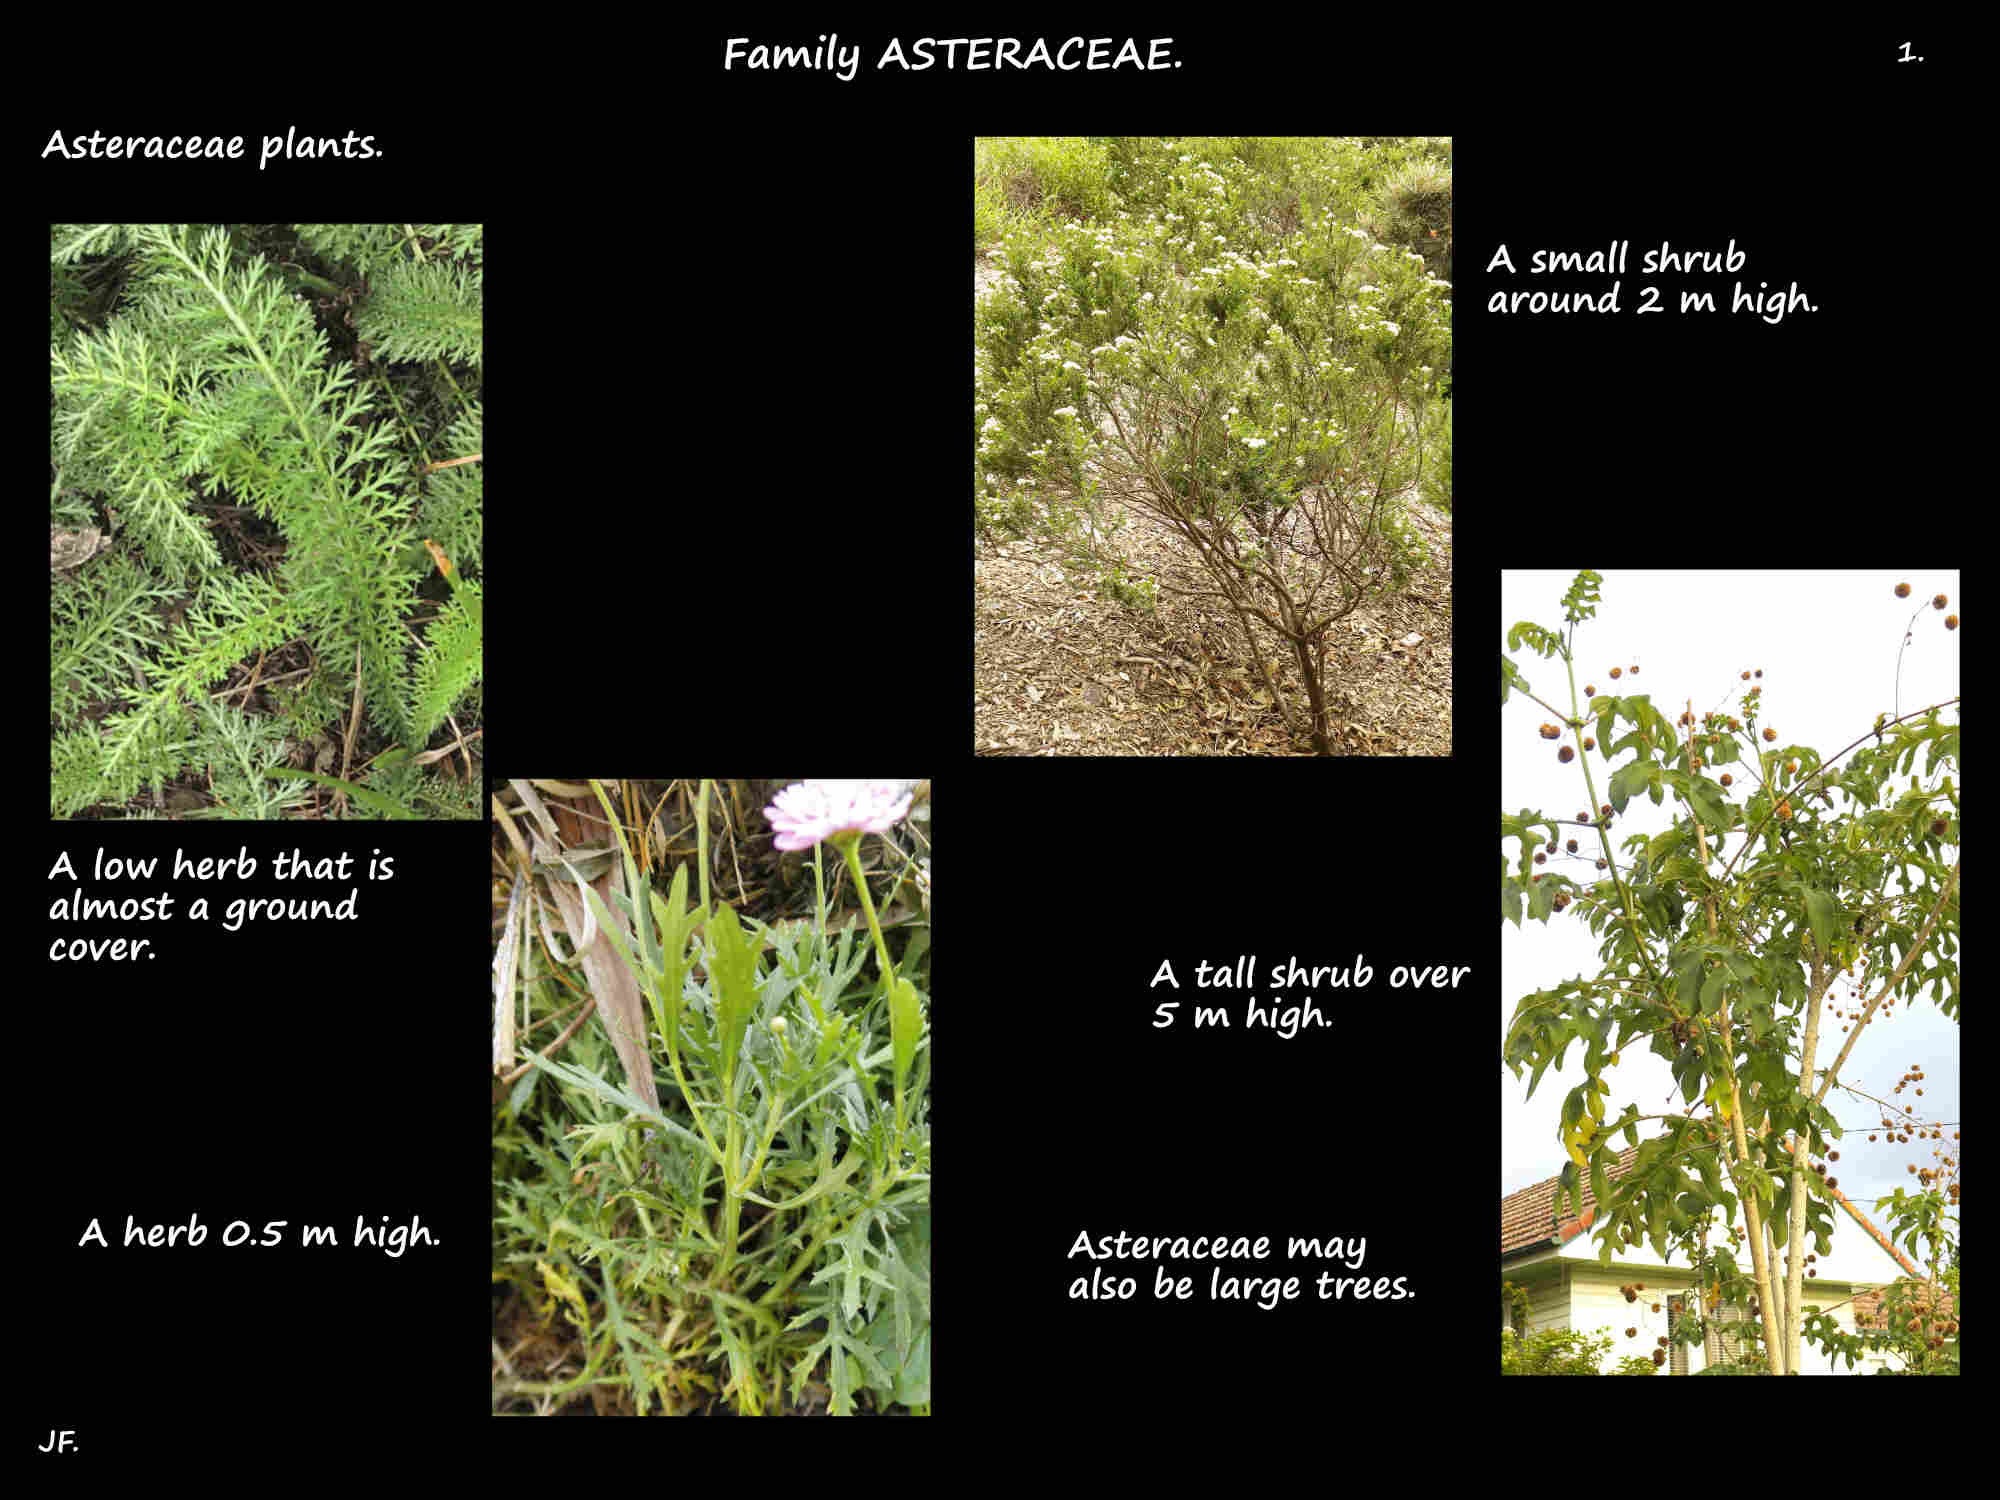 1 Asteraceae plants can be herbs, shrubs or trees